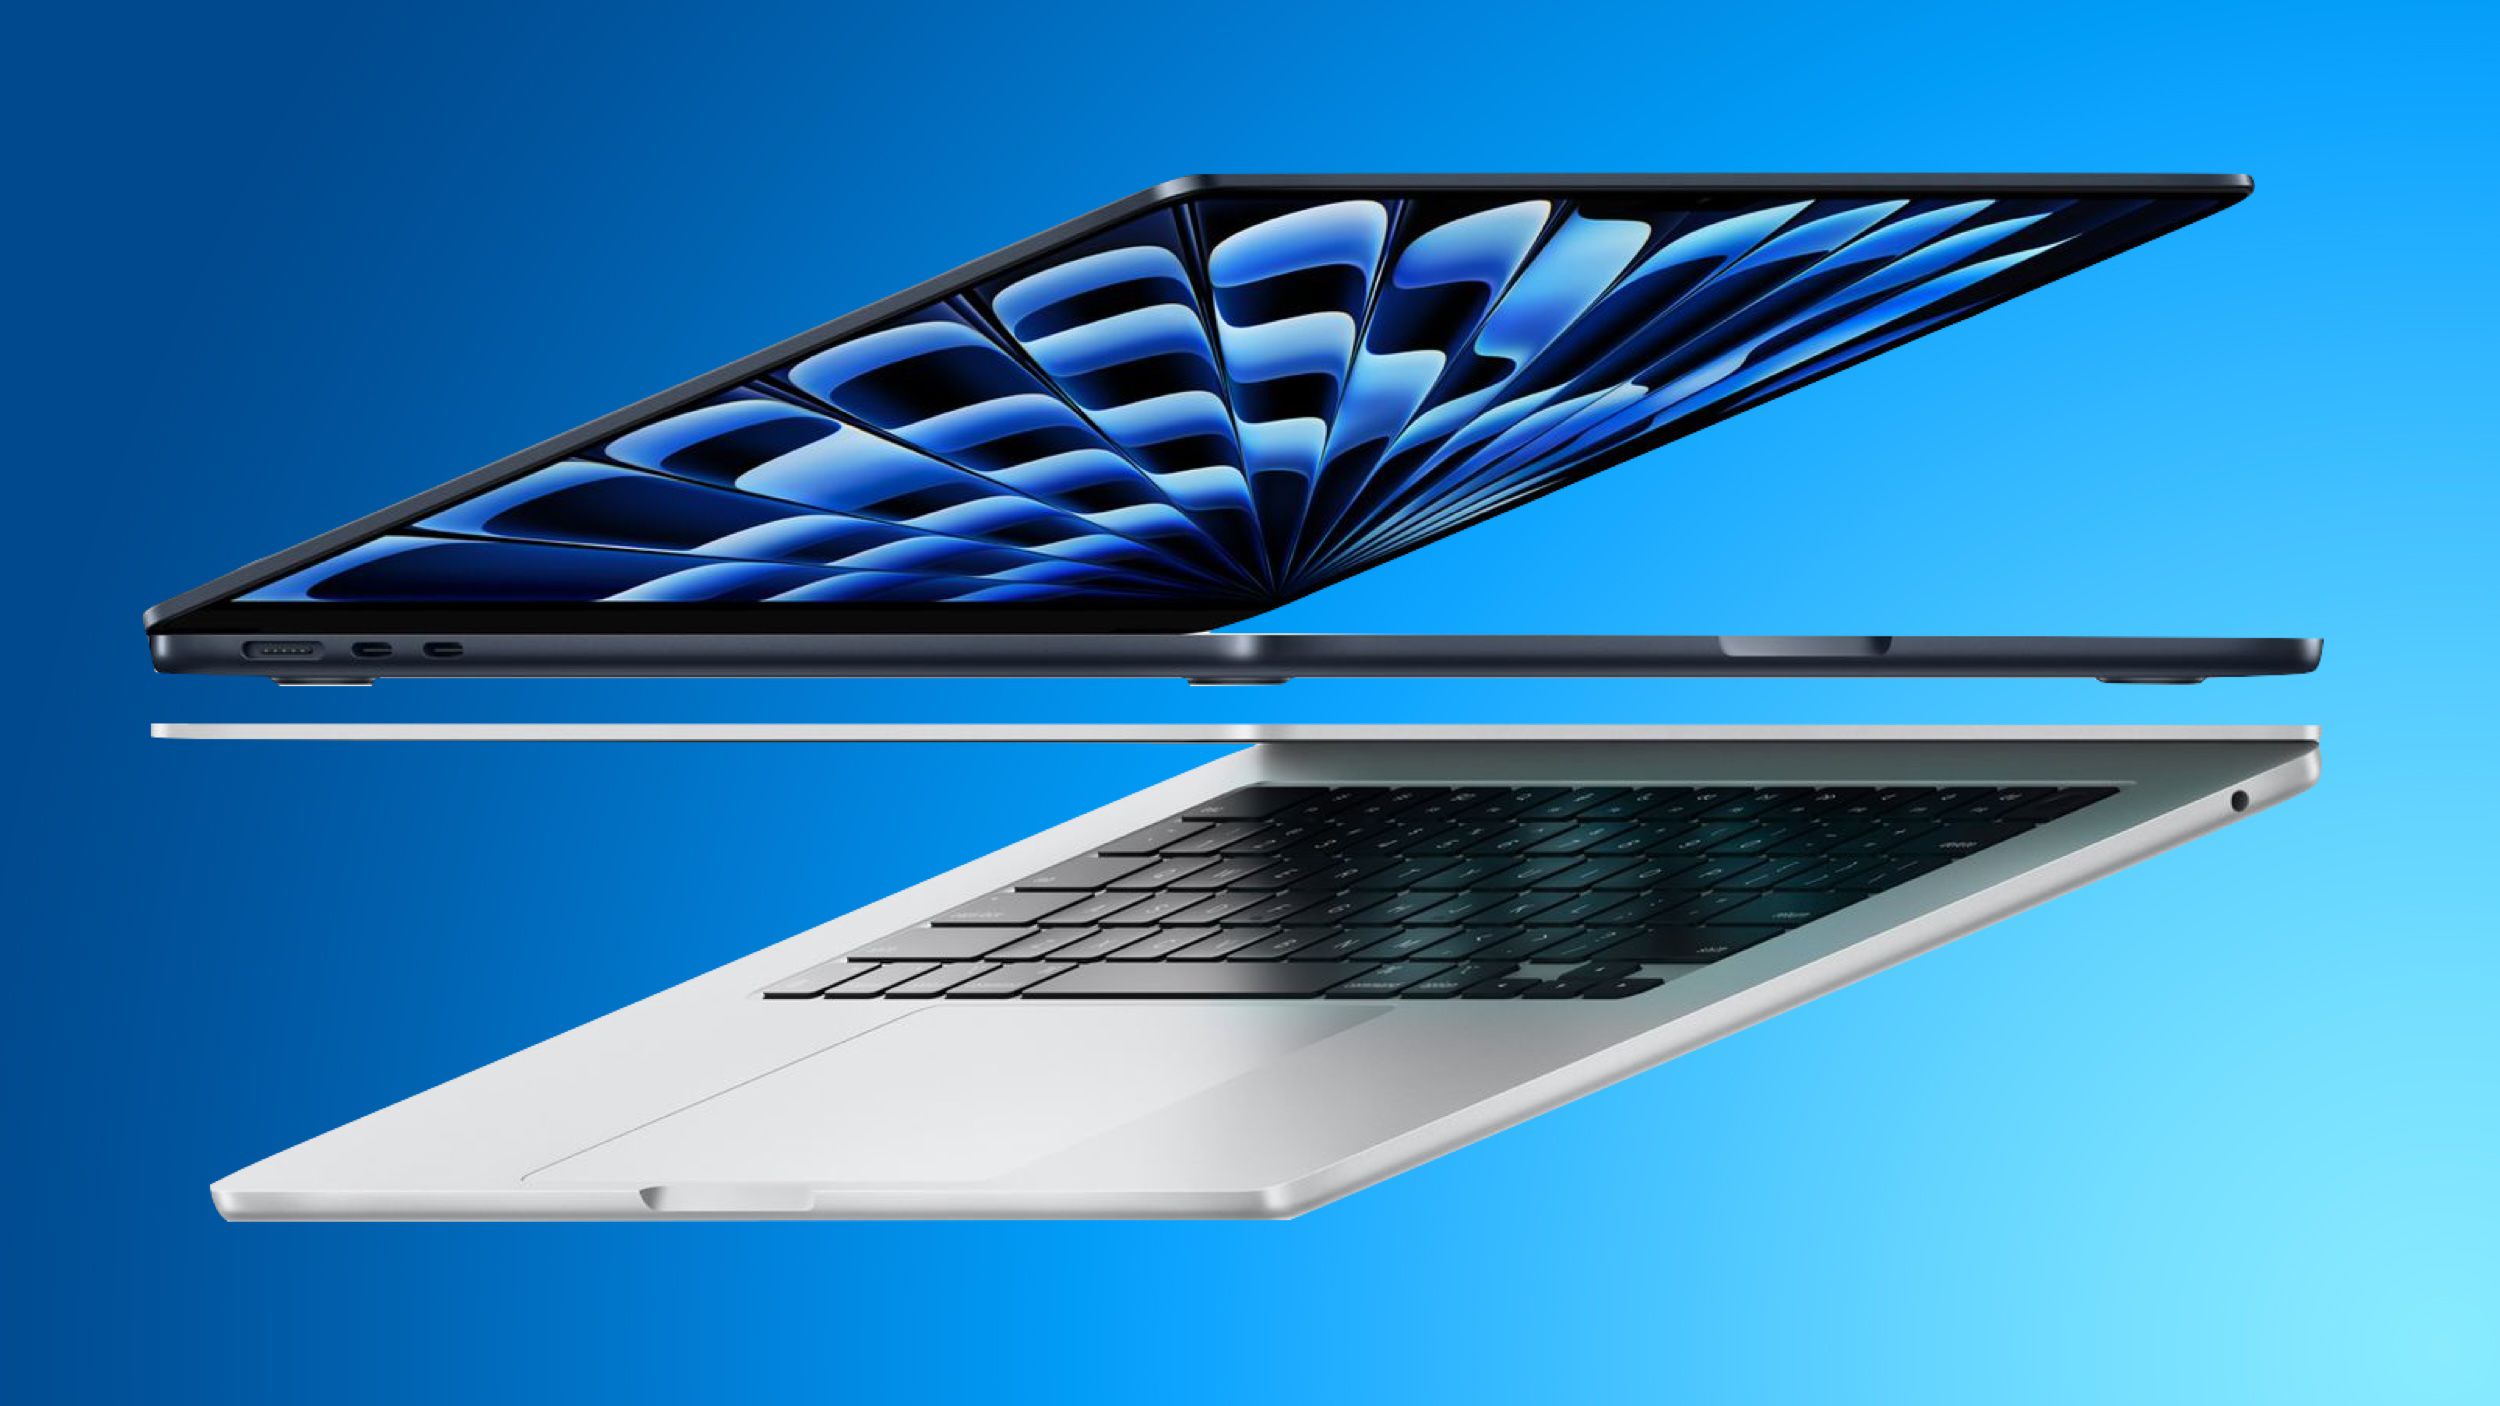 Early Benchmark Results Show MacBook Air With M3 Chip as Strong Contender in Performance